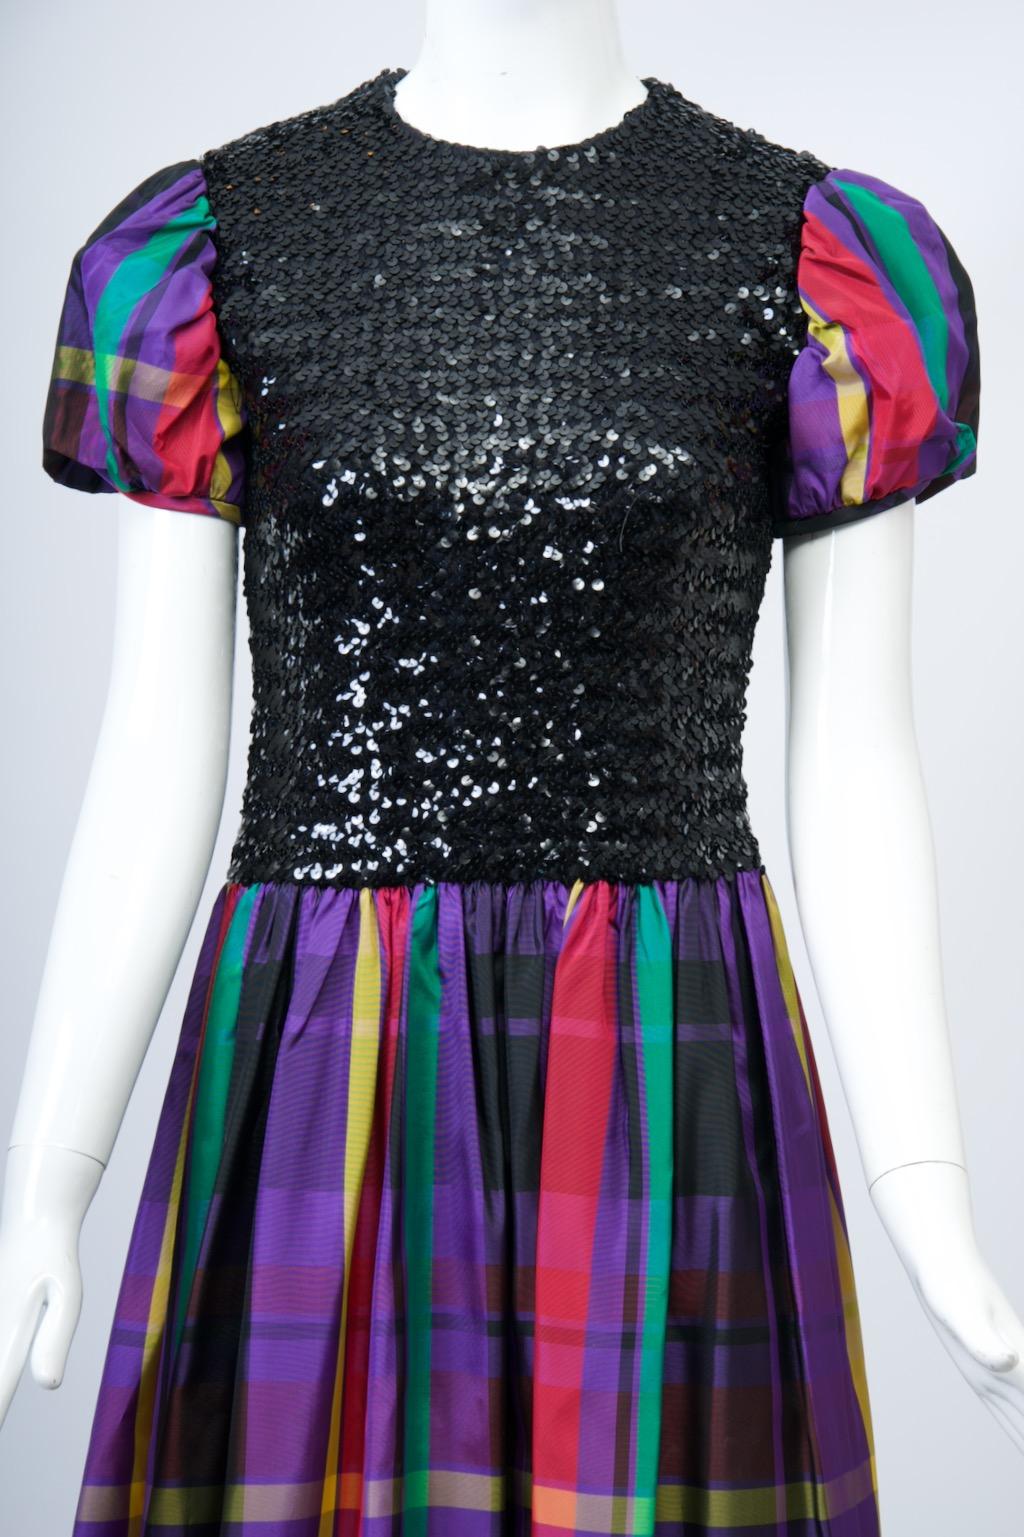 c.1970 Victor Costa for Romantica long dress combining a black sequin bodice juxtaposed with a large-scale taffeta plaid for the full ankle-length skirt and short puffed sleeves, a nice riff on high/low fashion. The shell-shaped bodice, which is